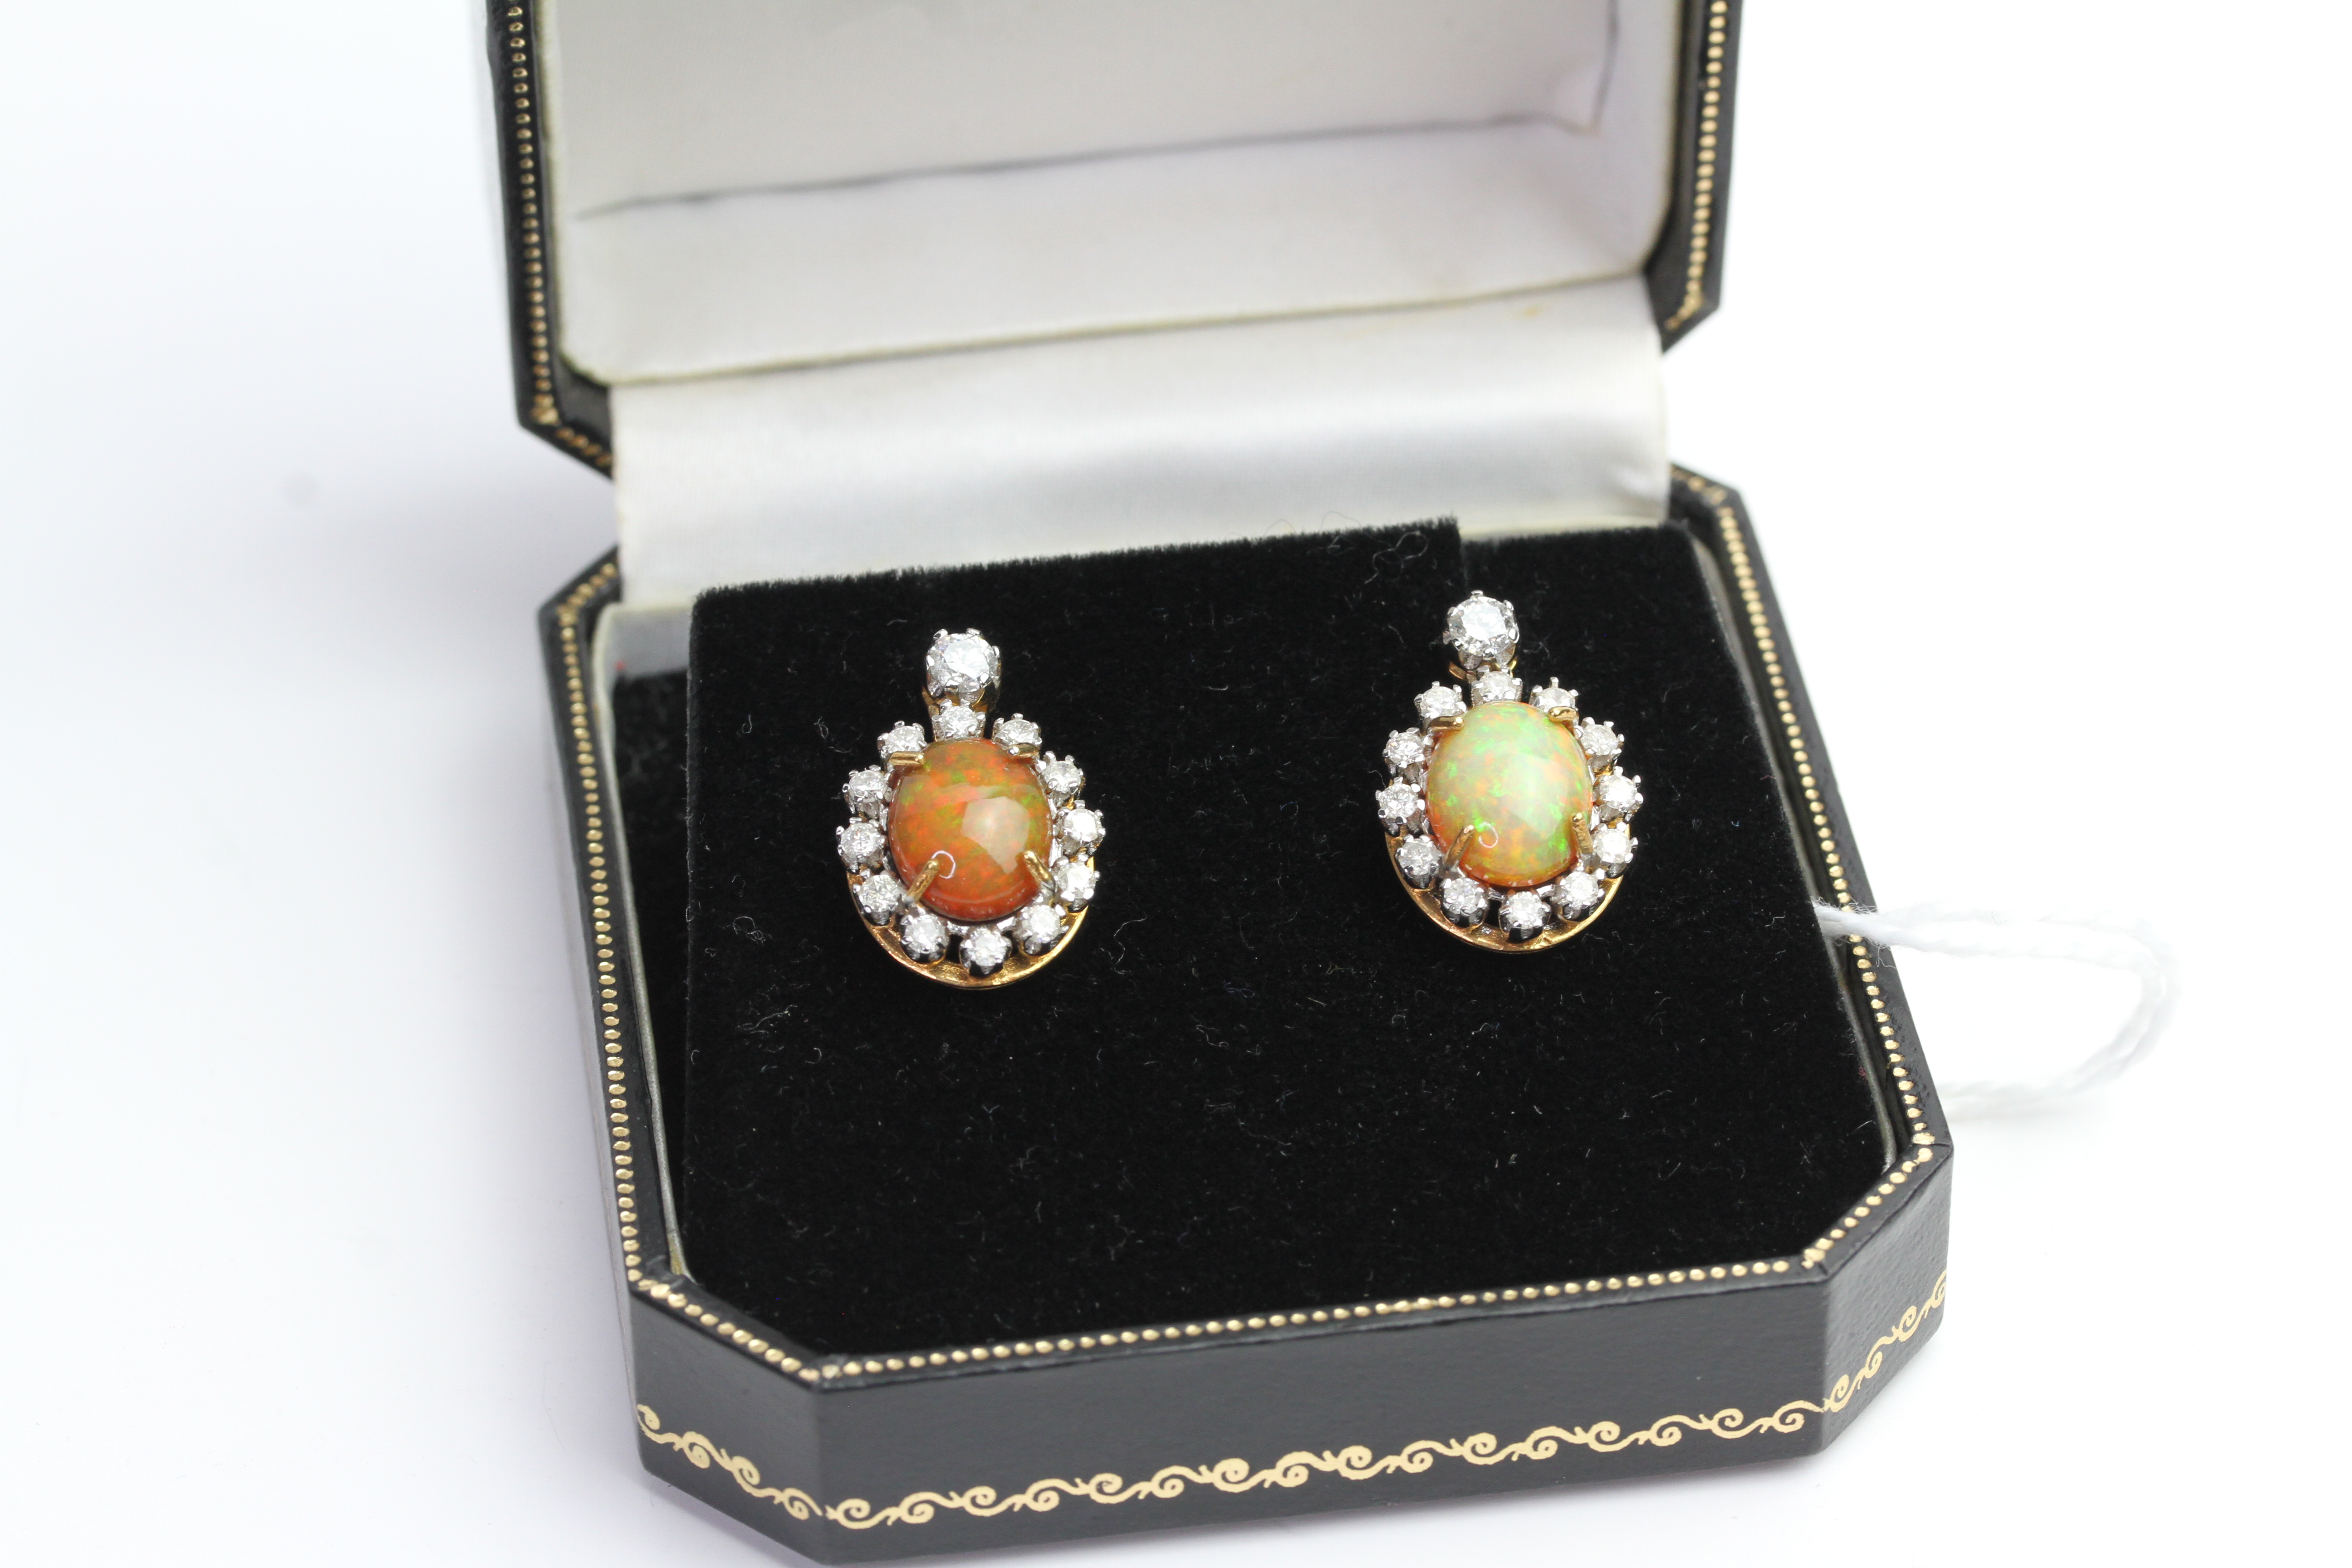 Pair of Opal and Diamond earrings, comes with box.